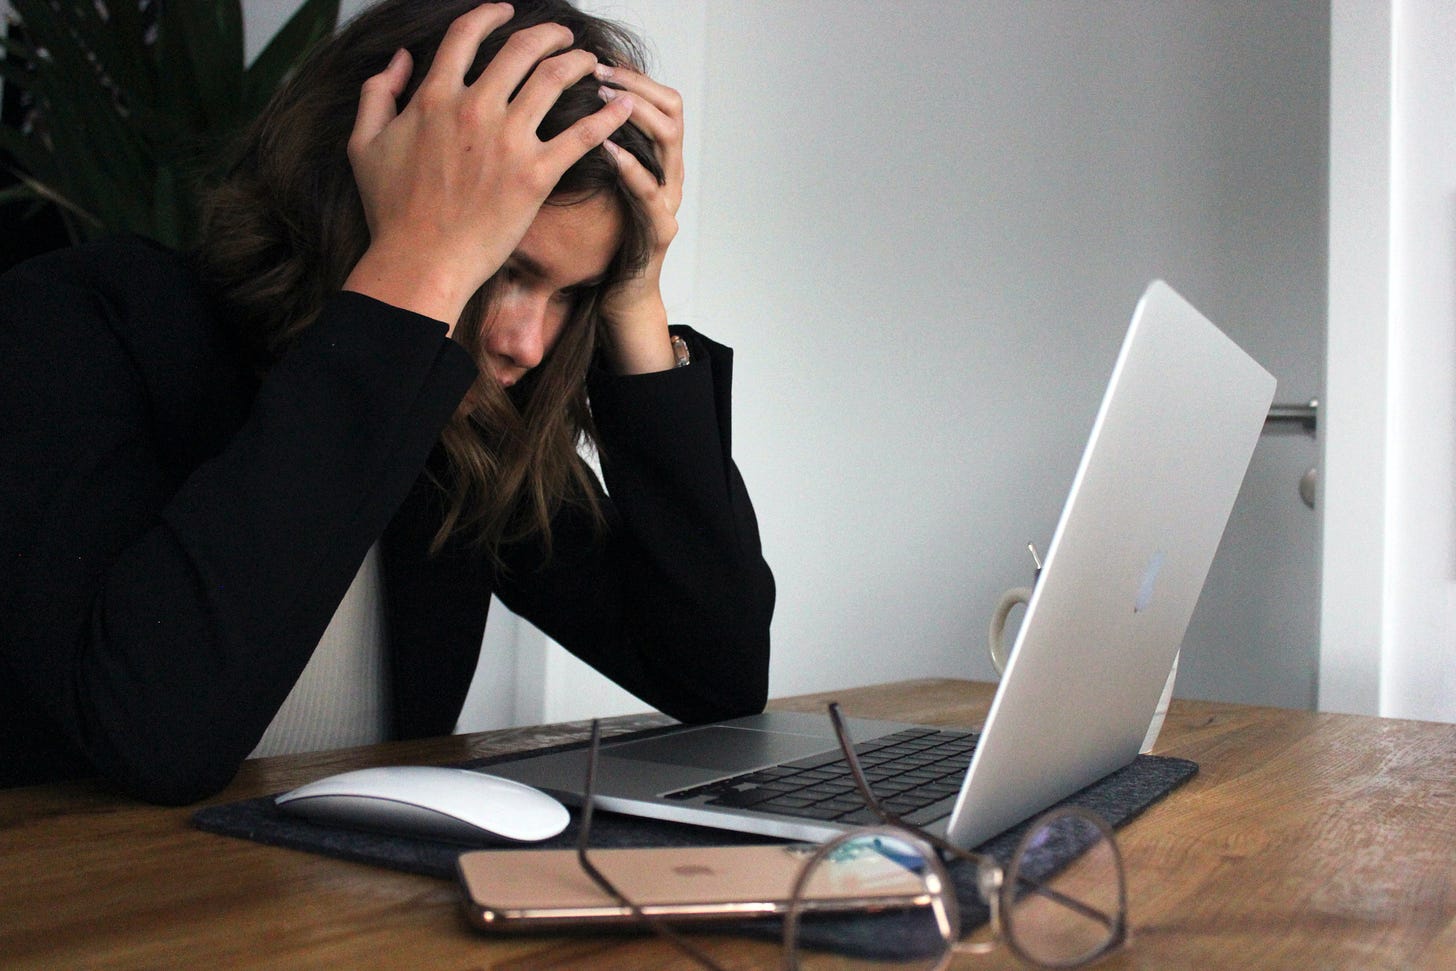 Woman looking at a laptop with her hands on her head indicating that she is stressed or is at a loss